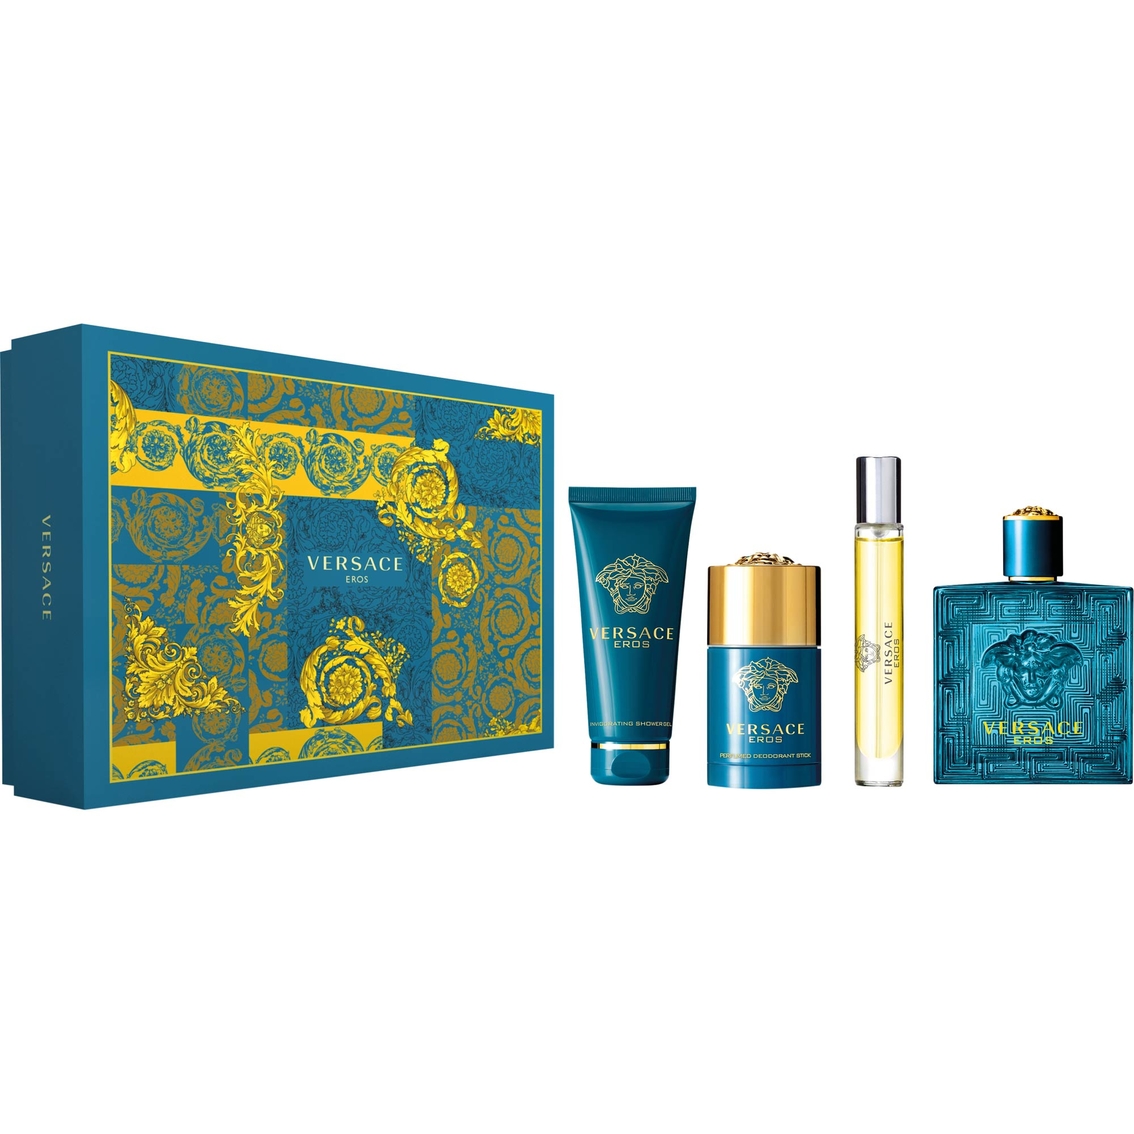 Versace Eros Gift Set | Gifts Sets For 